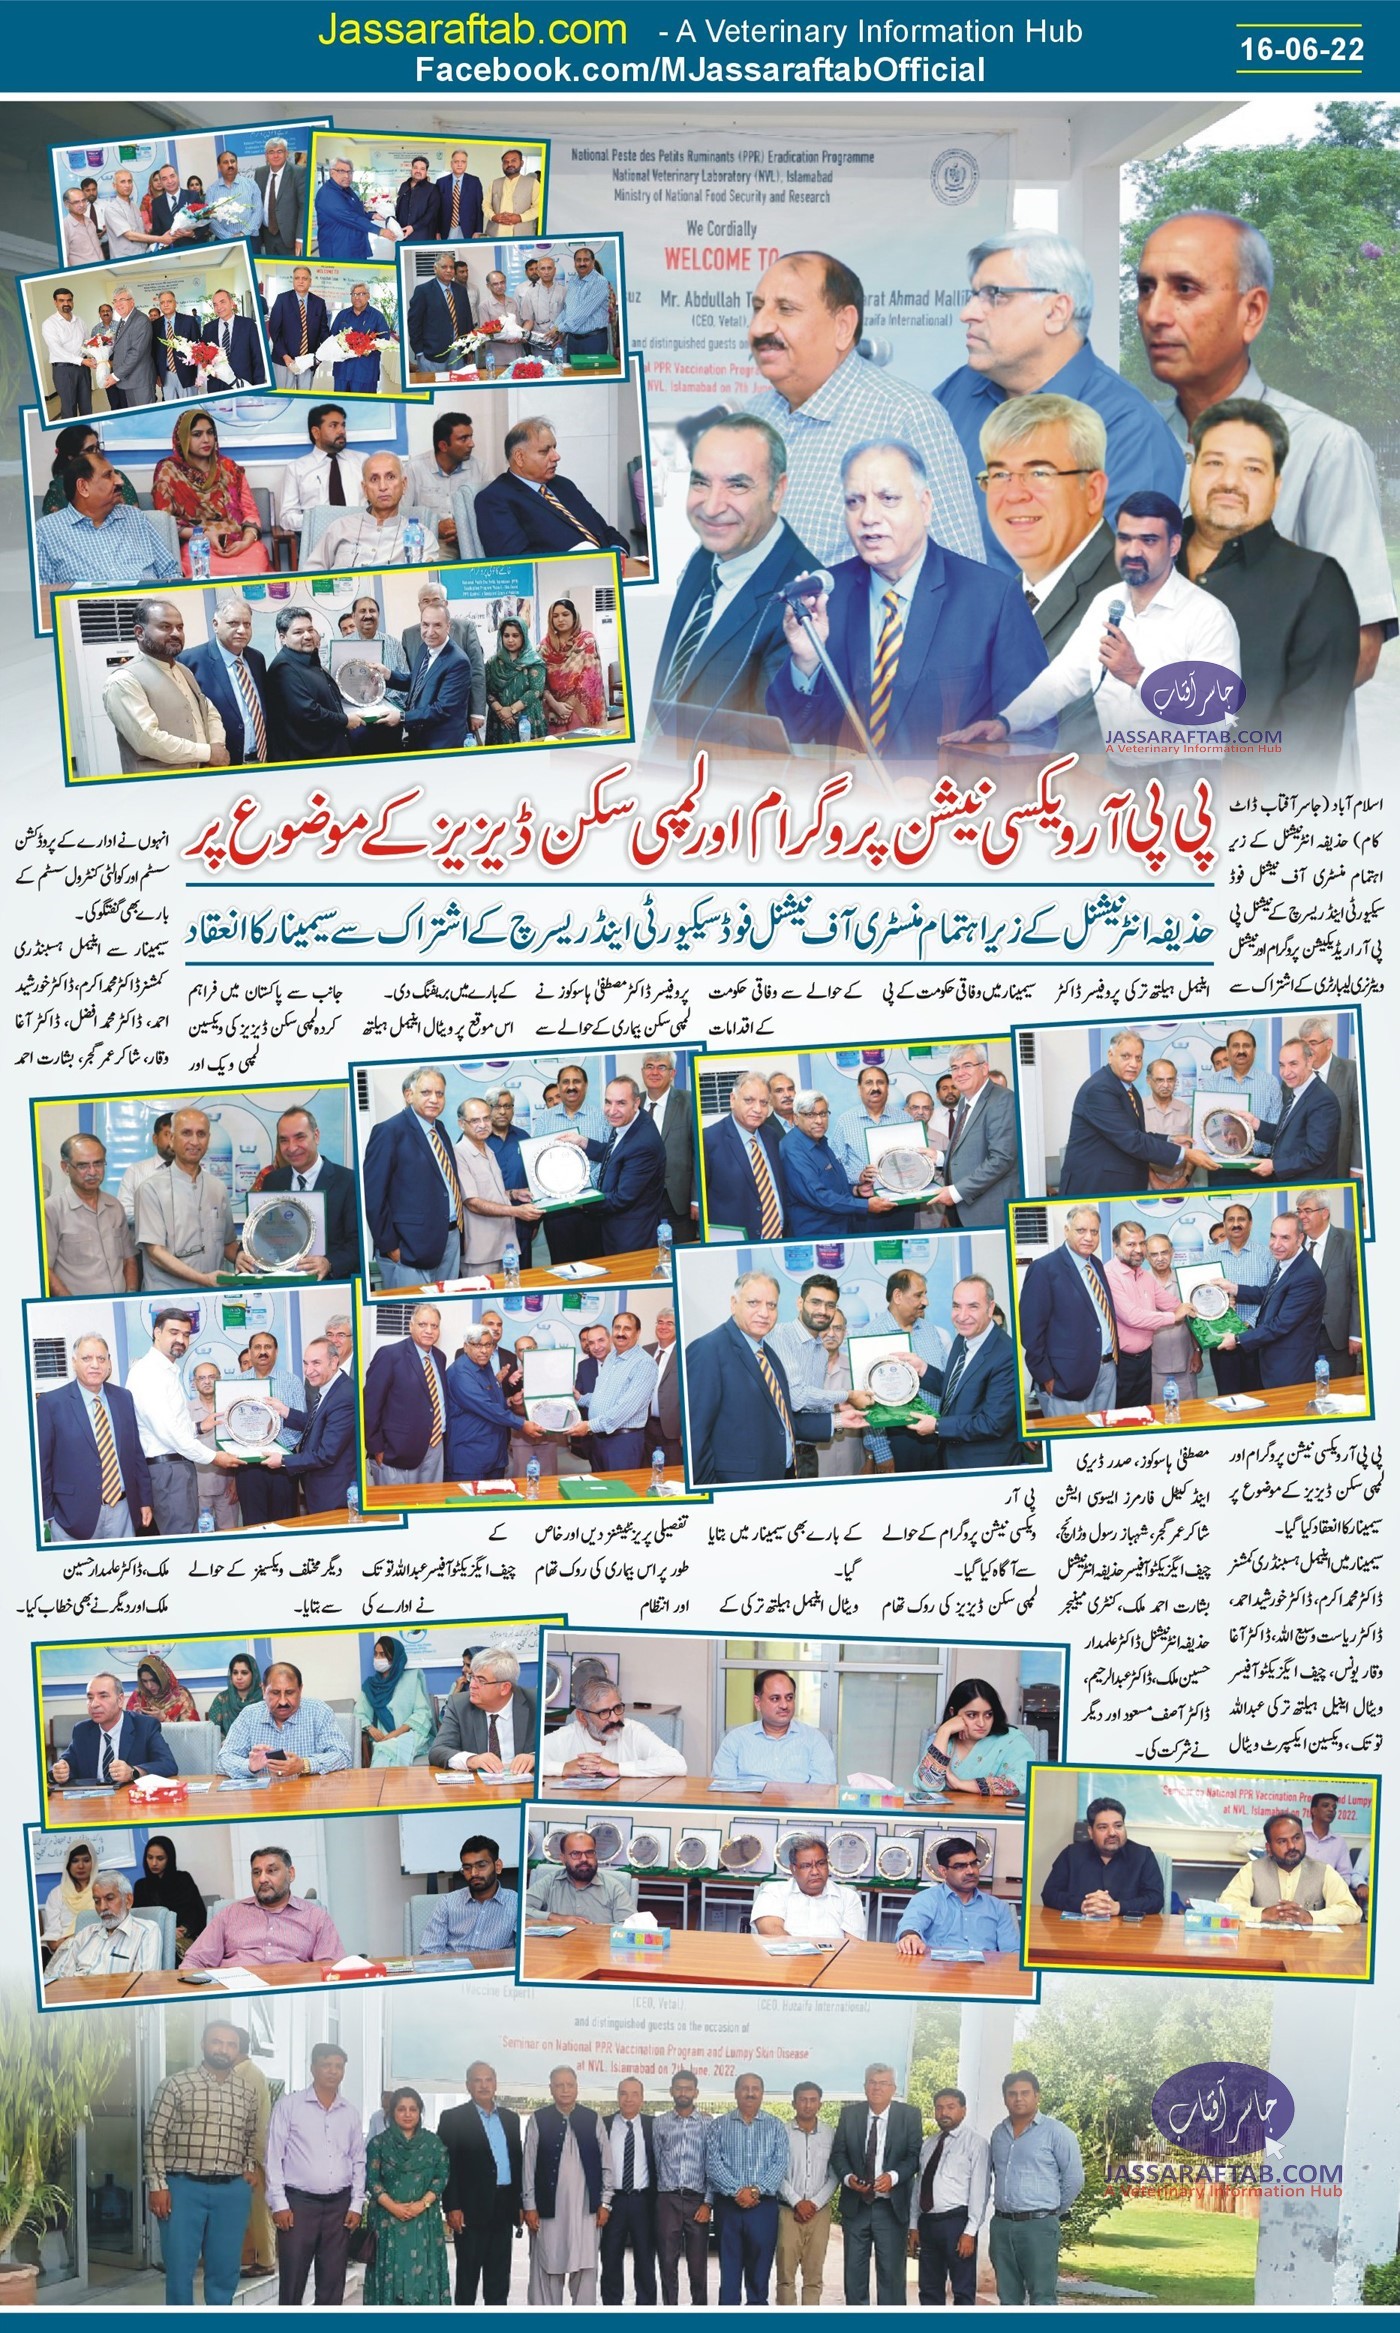 Seminar on PPR Control and LSD Control held at Islamabad | PPR Vaccination Program in Sheep and Goat